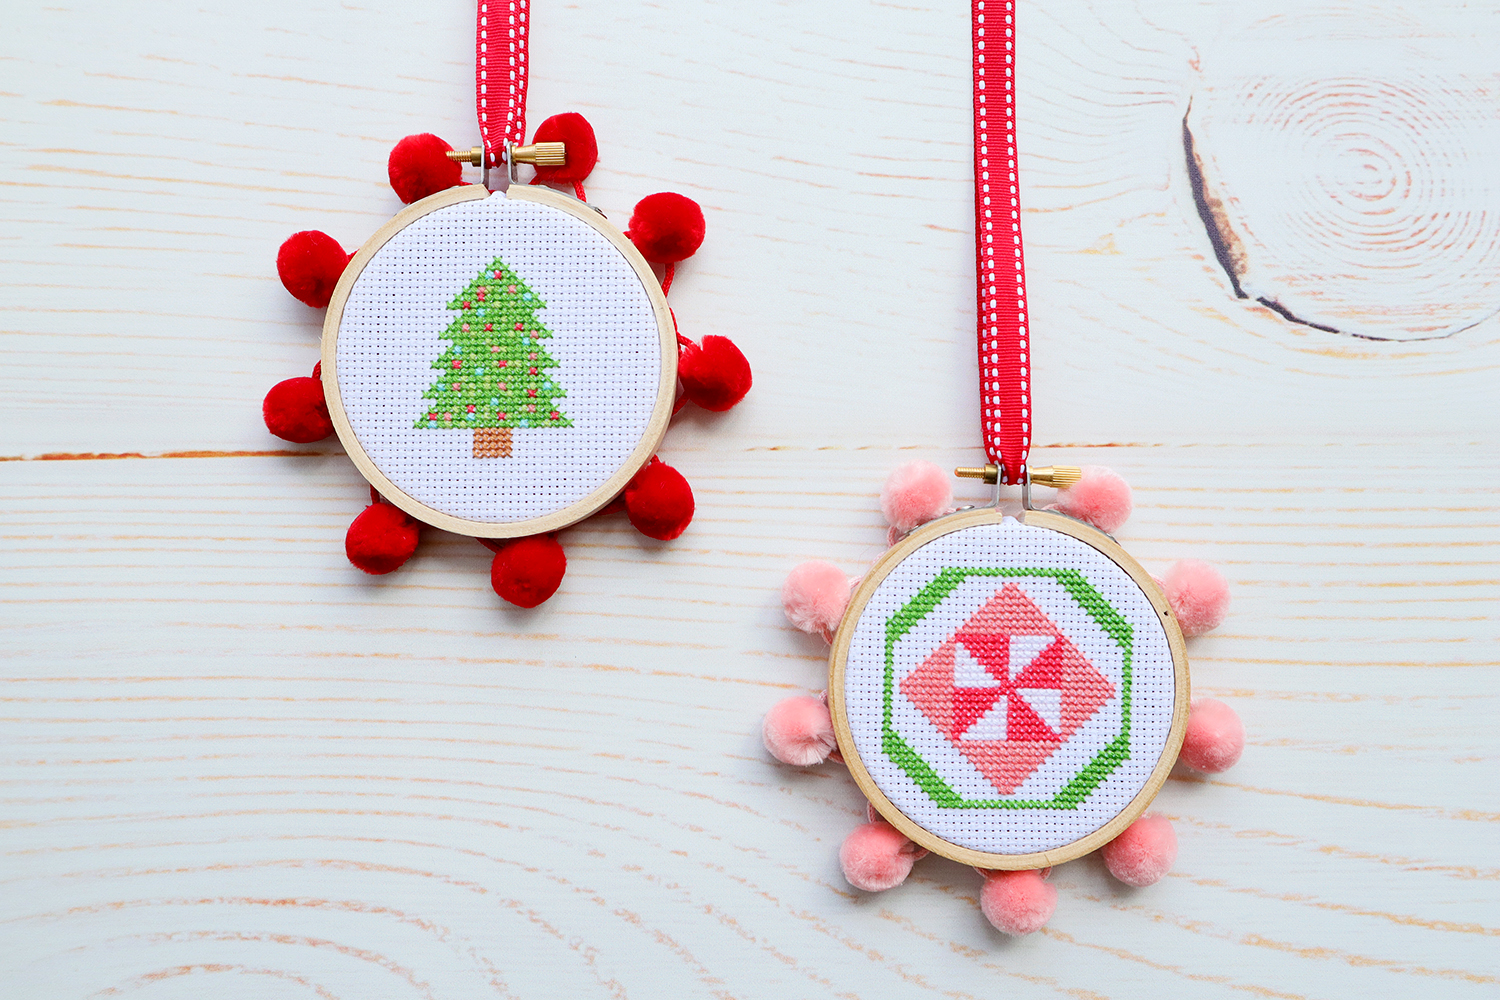 Peppermint Forest Cross Stitch Patterns